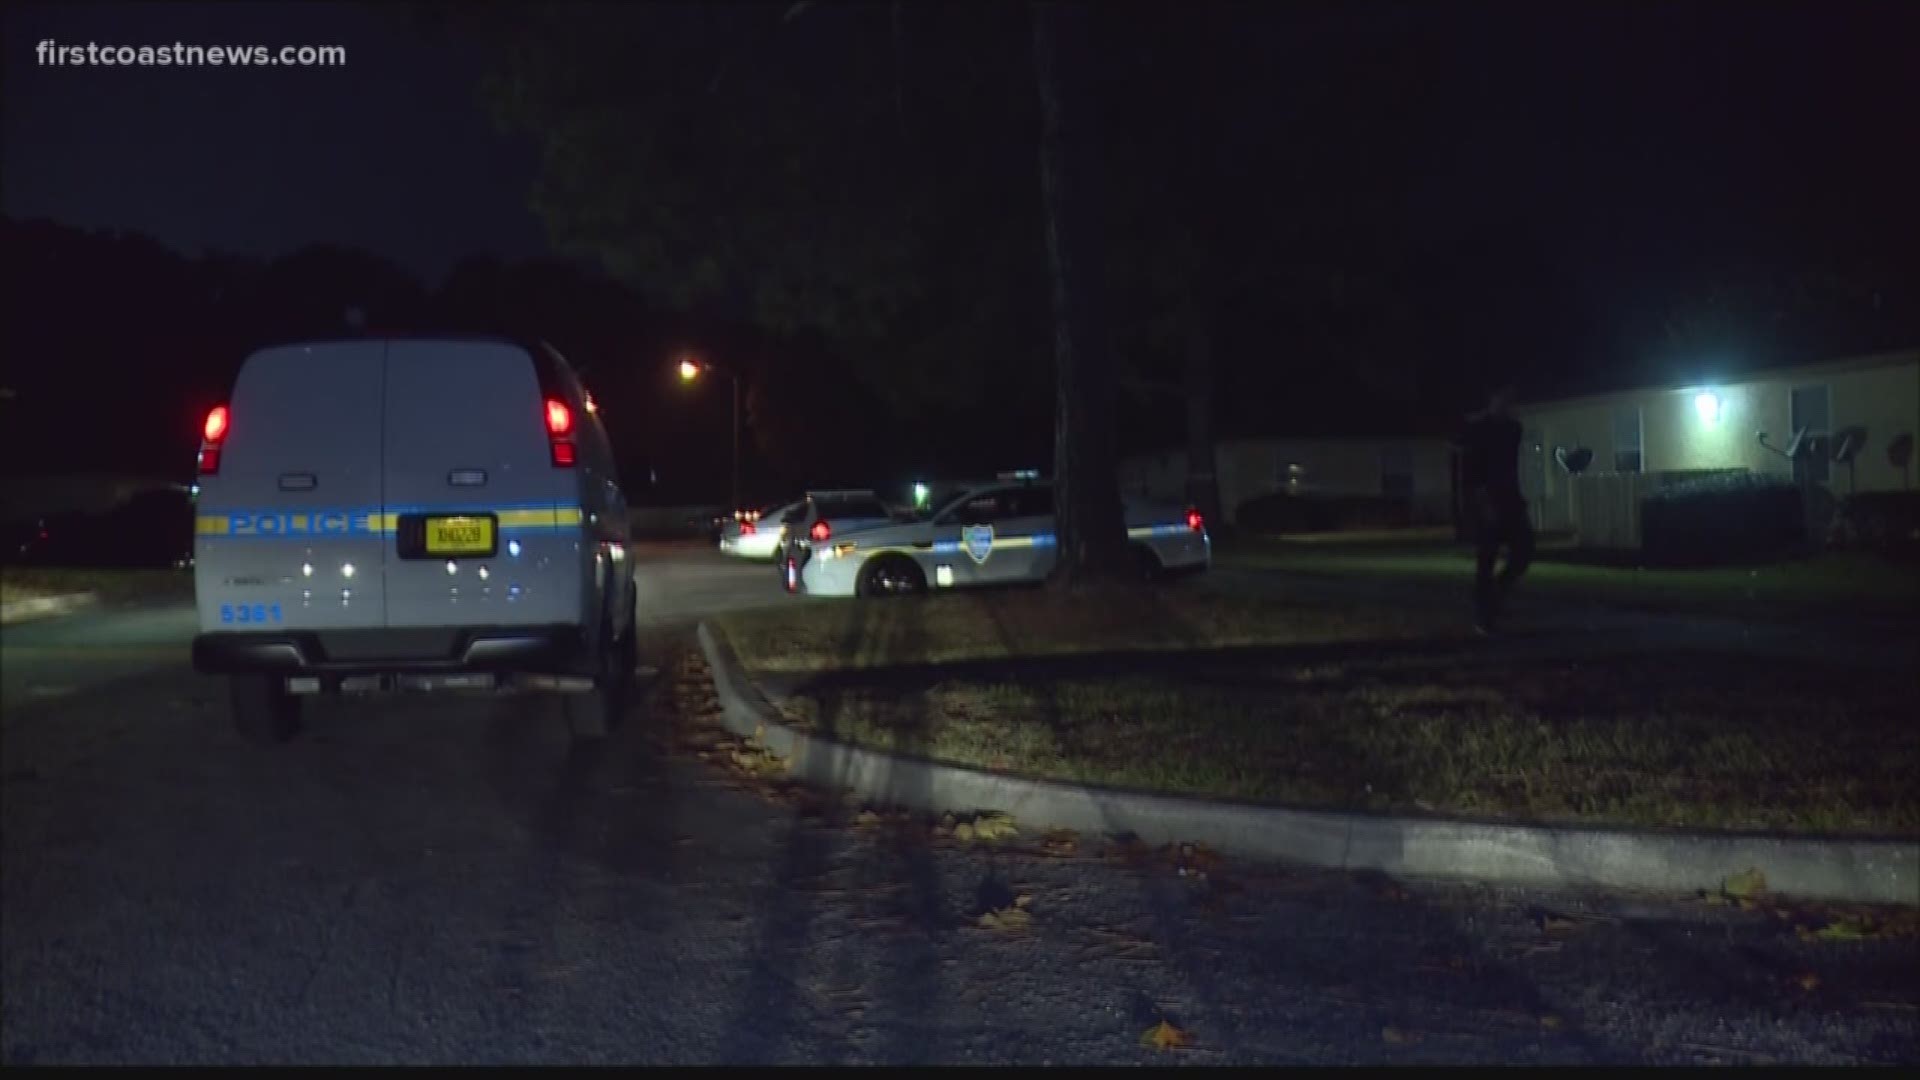 A man is OK after he was shot in the groin area at a Westside apartment complex.